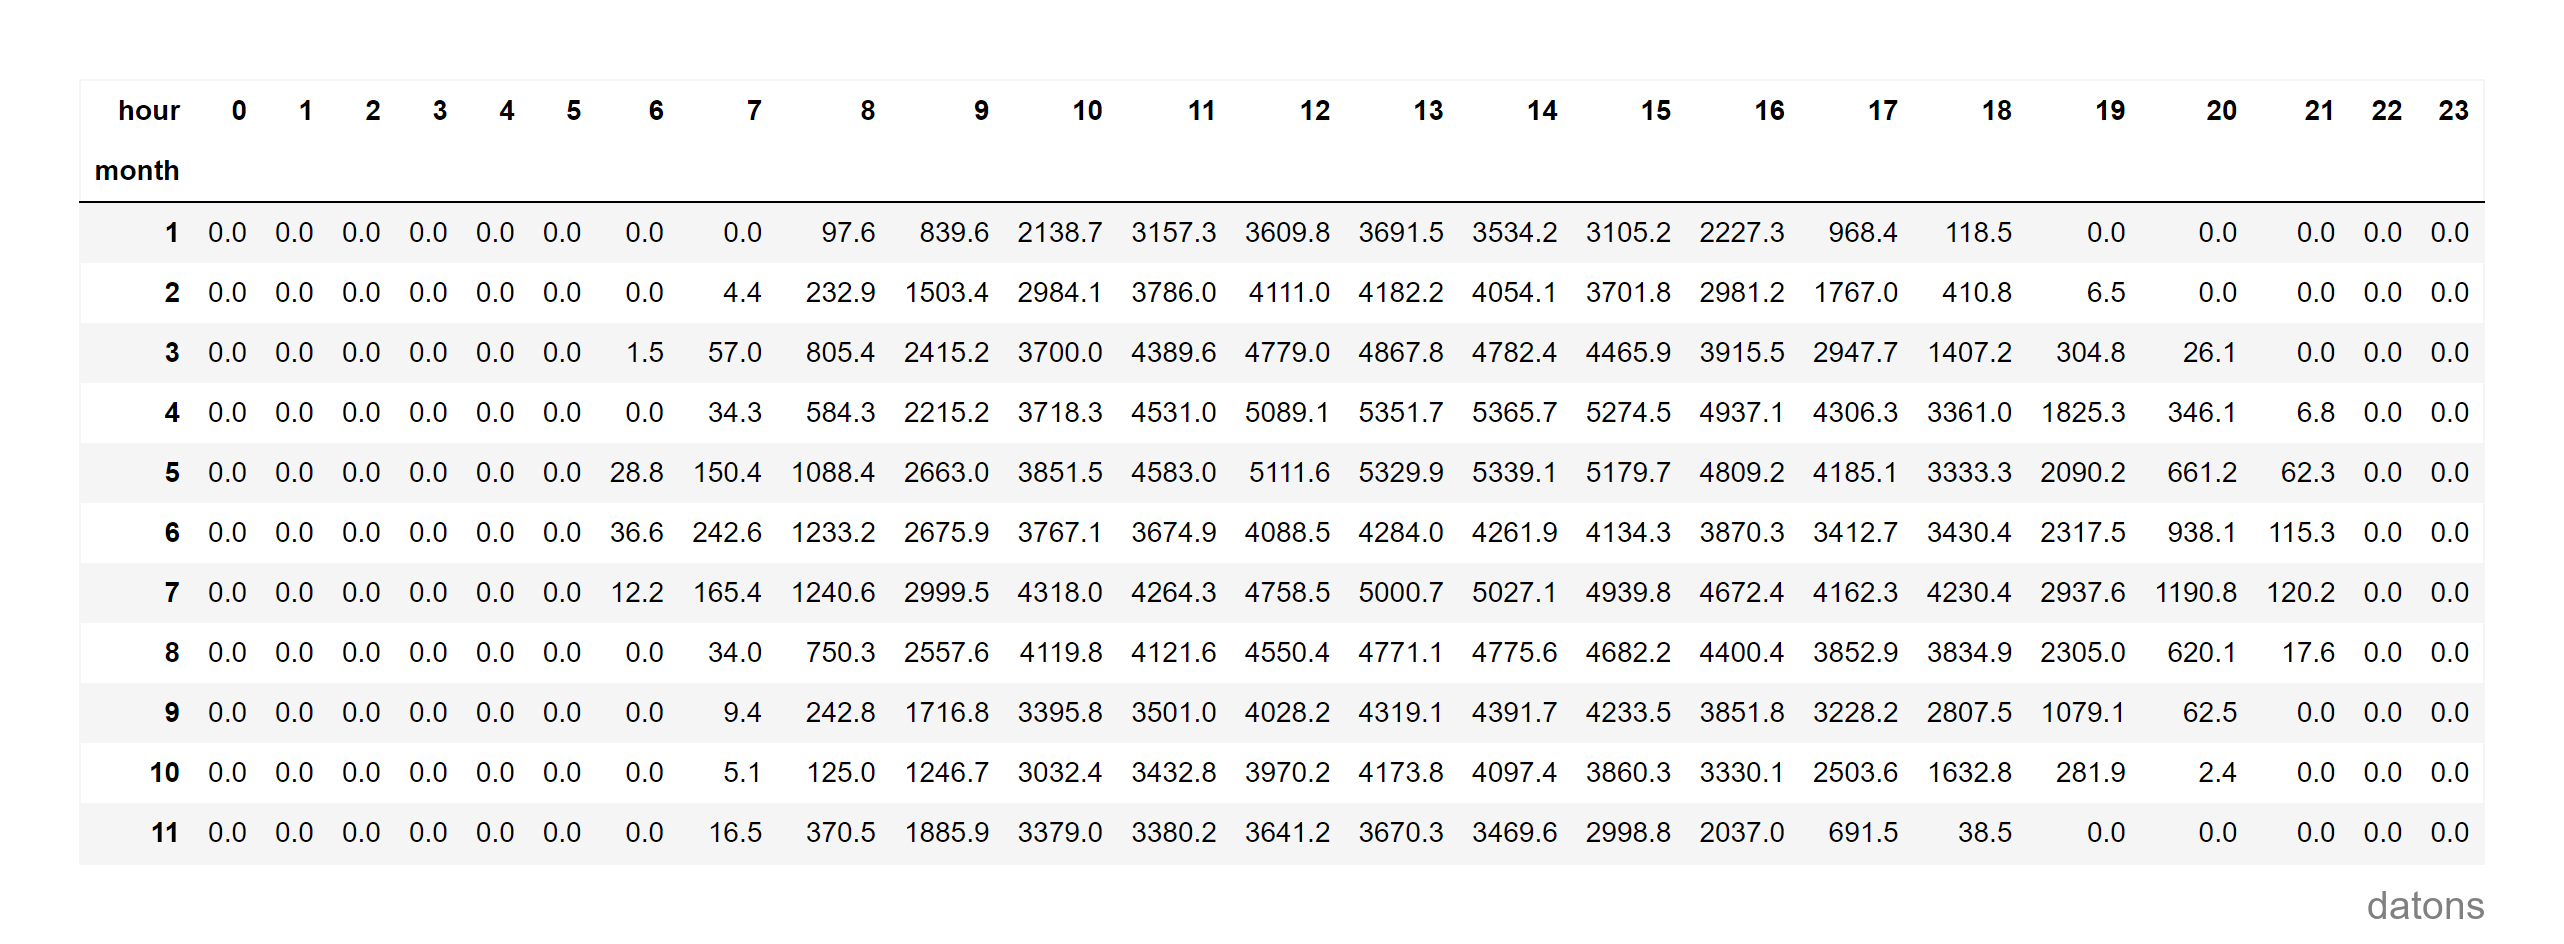 Pivot table in Pandas showing total solar energy generation by month and hour.